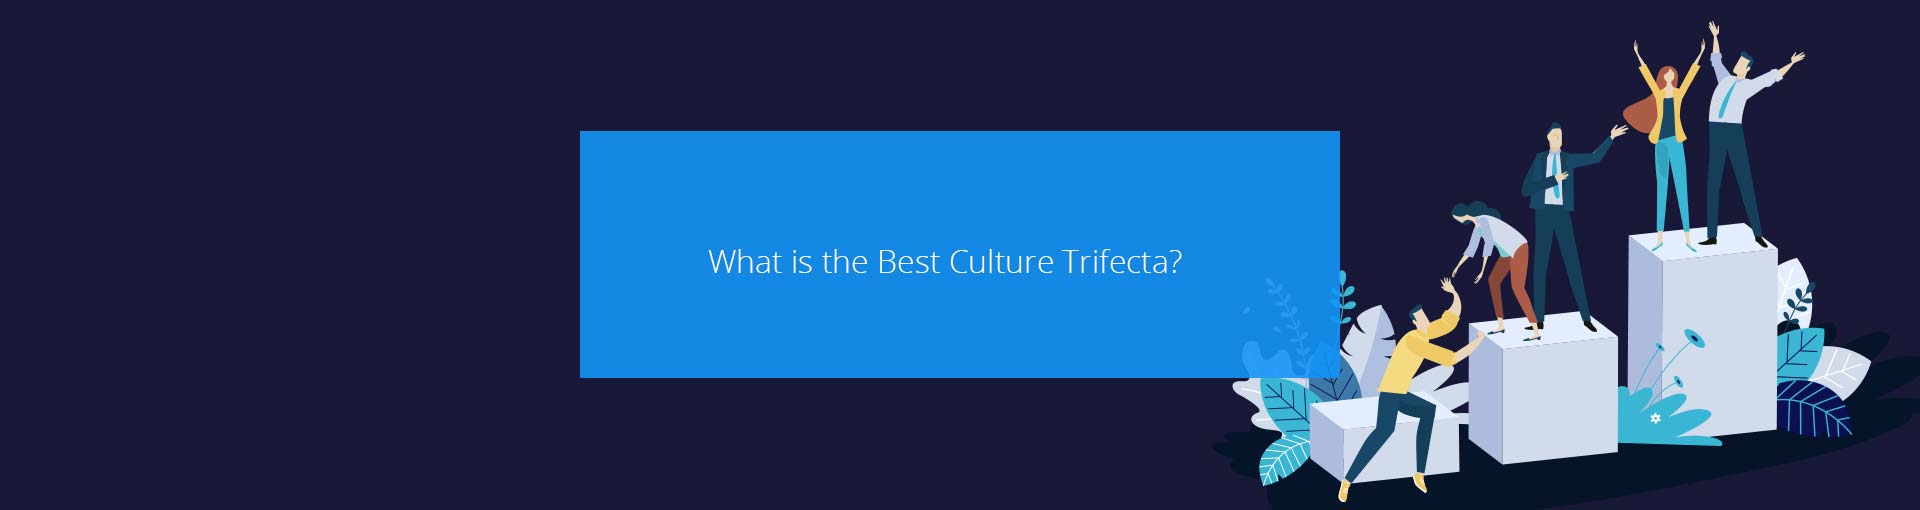 What is the Best Culture Trifecta? See the BQE Software Trifecta That Ranked Us "Top 25 USA Companies" in 3 Categories Featured Image